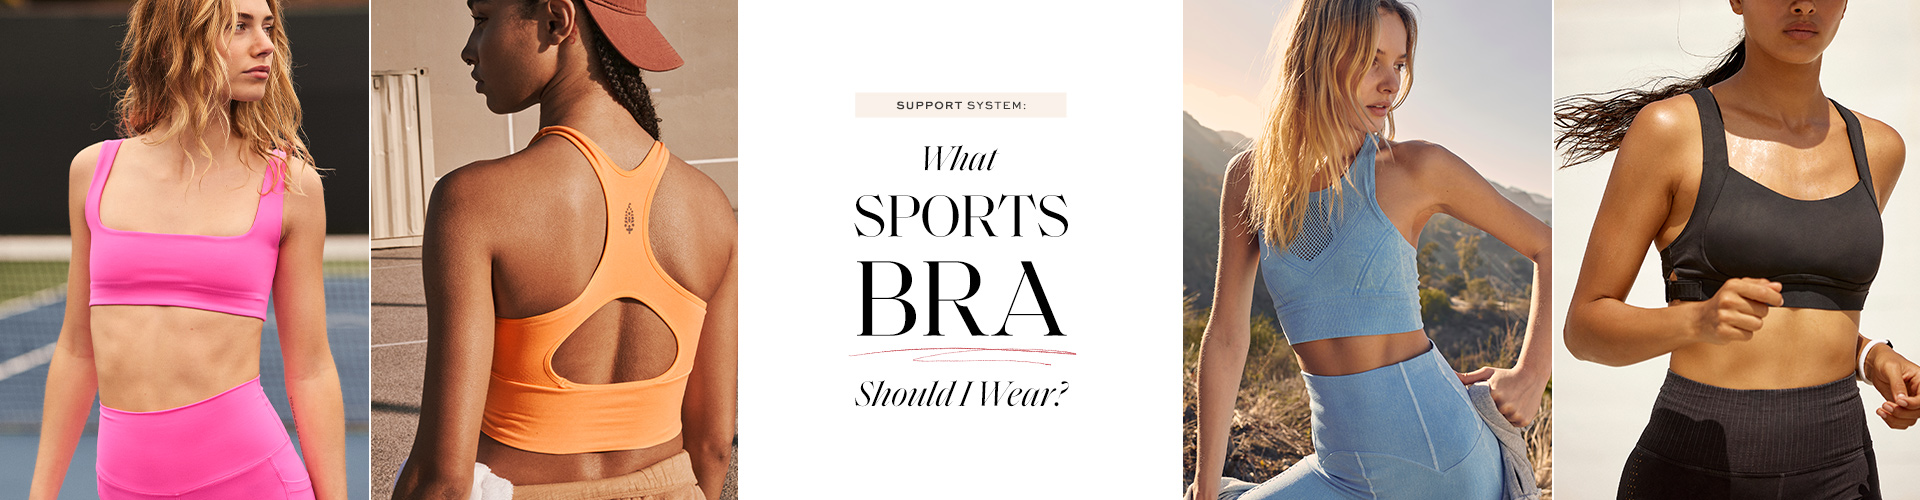 Support System: What Sports Bra Should I Wear?